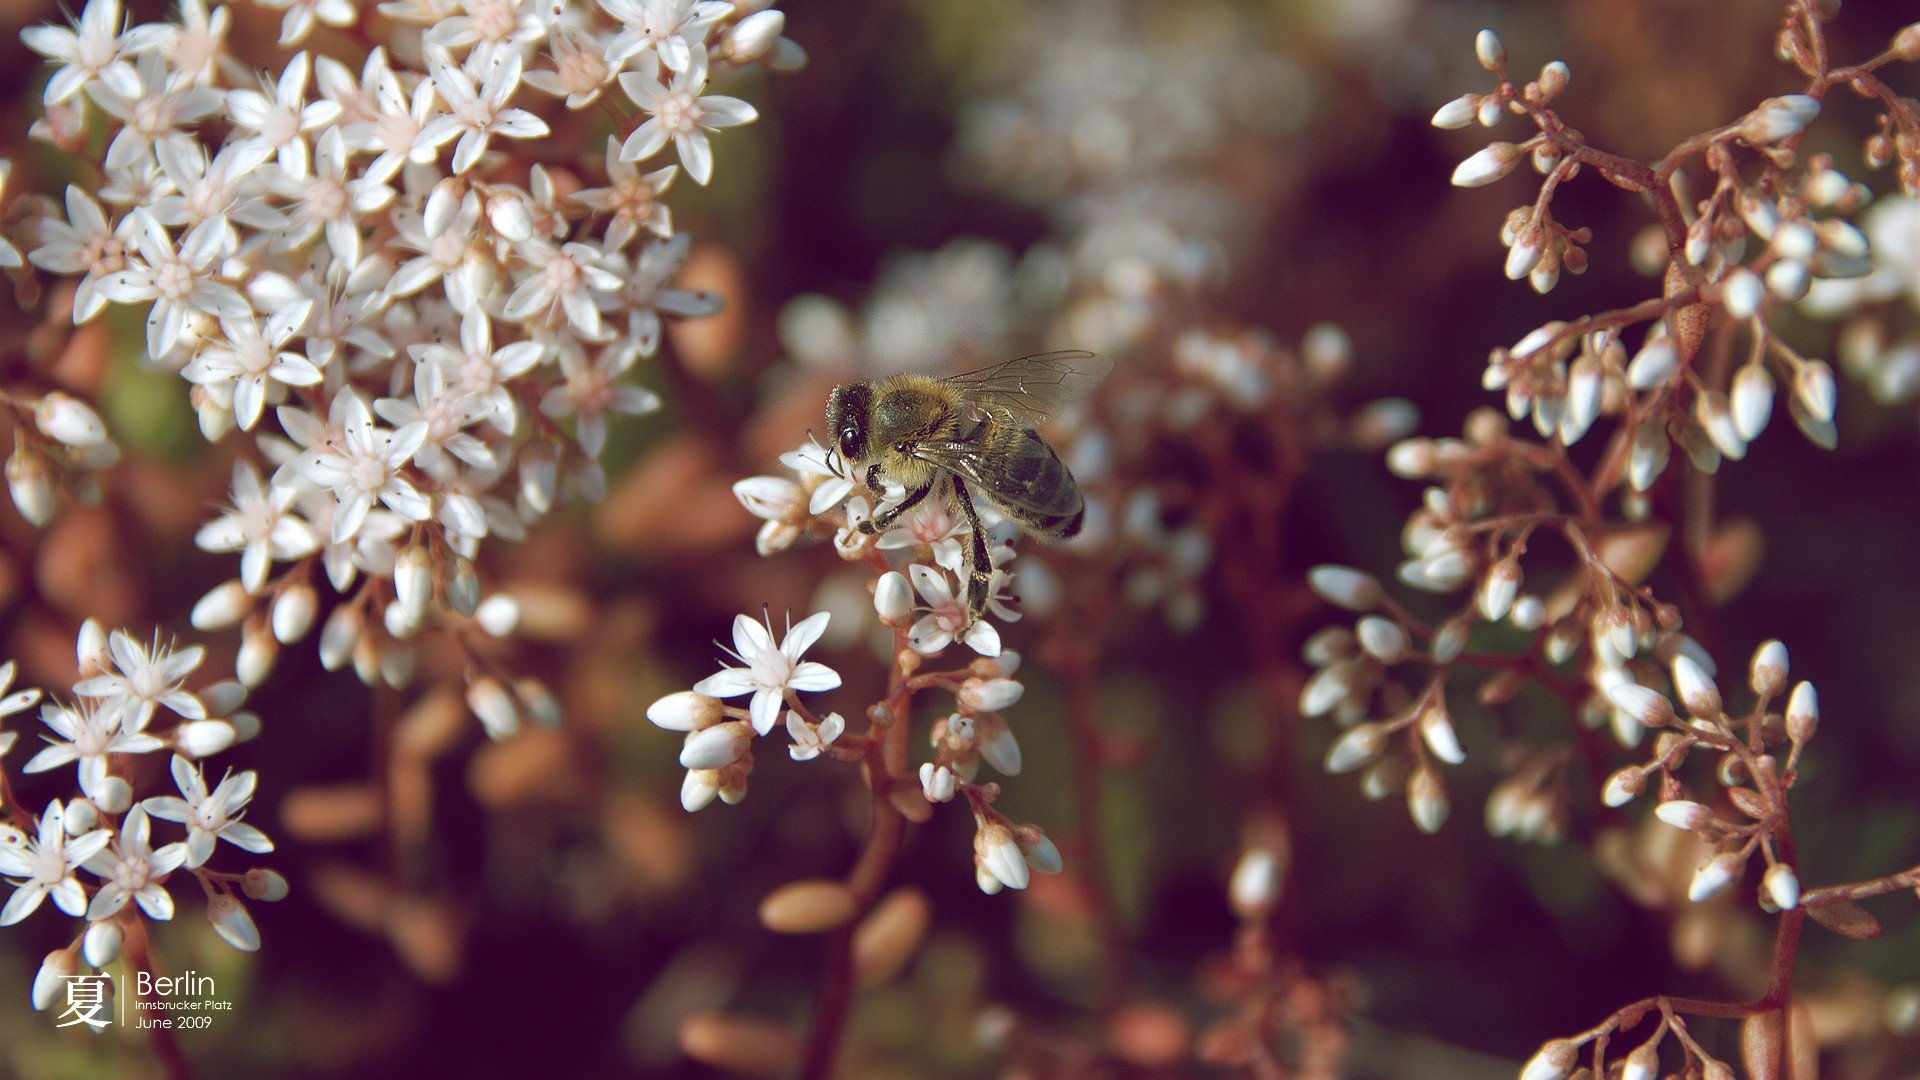 nature, Flowers, Insects, Summer, Bees, Branches, White, Flowers Wallpaper